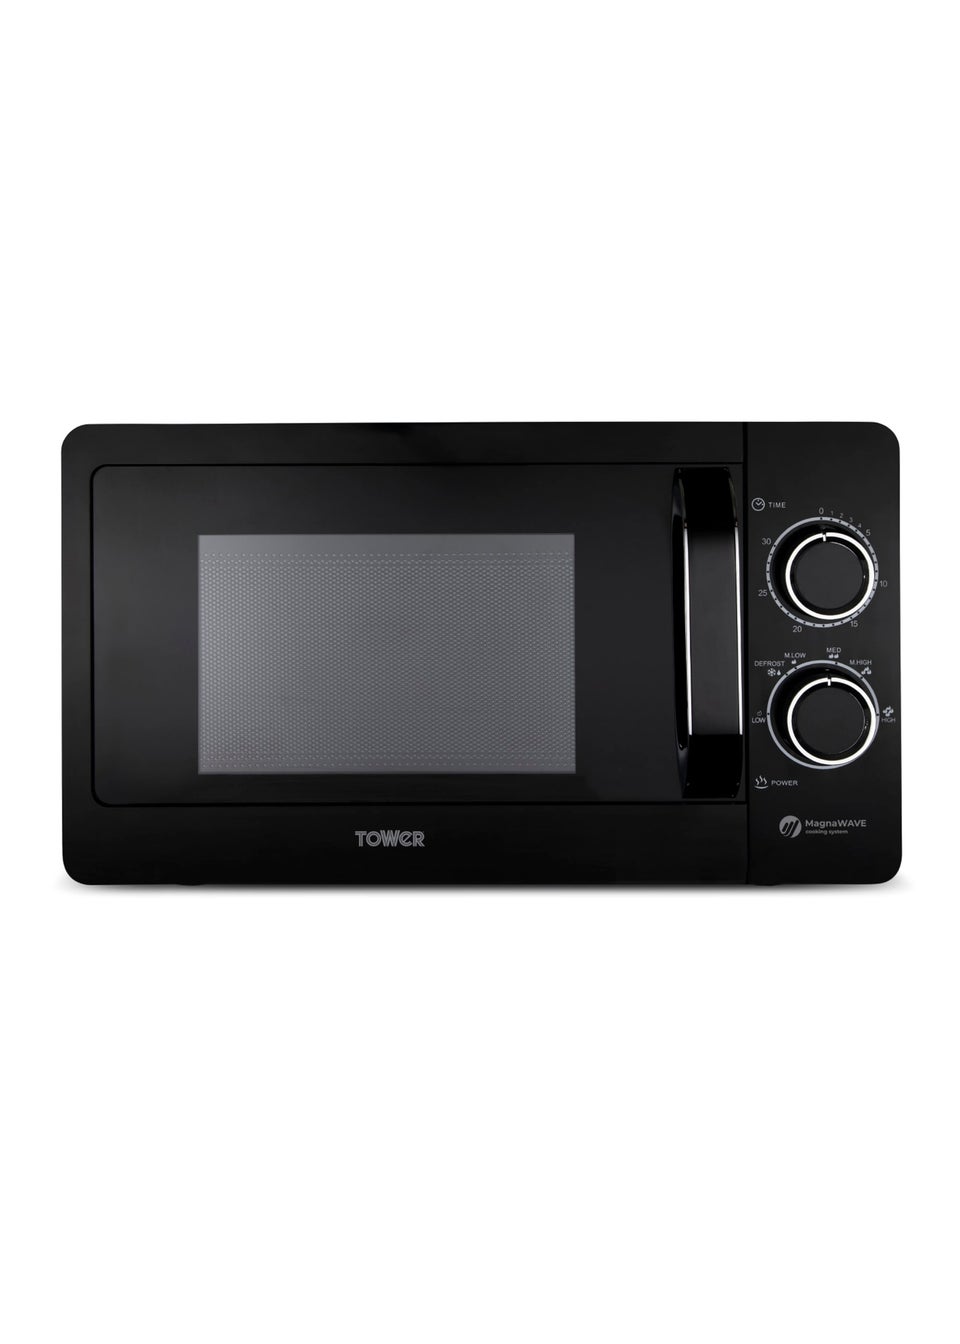 Tower 800W Manual Microwave (20L)